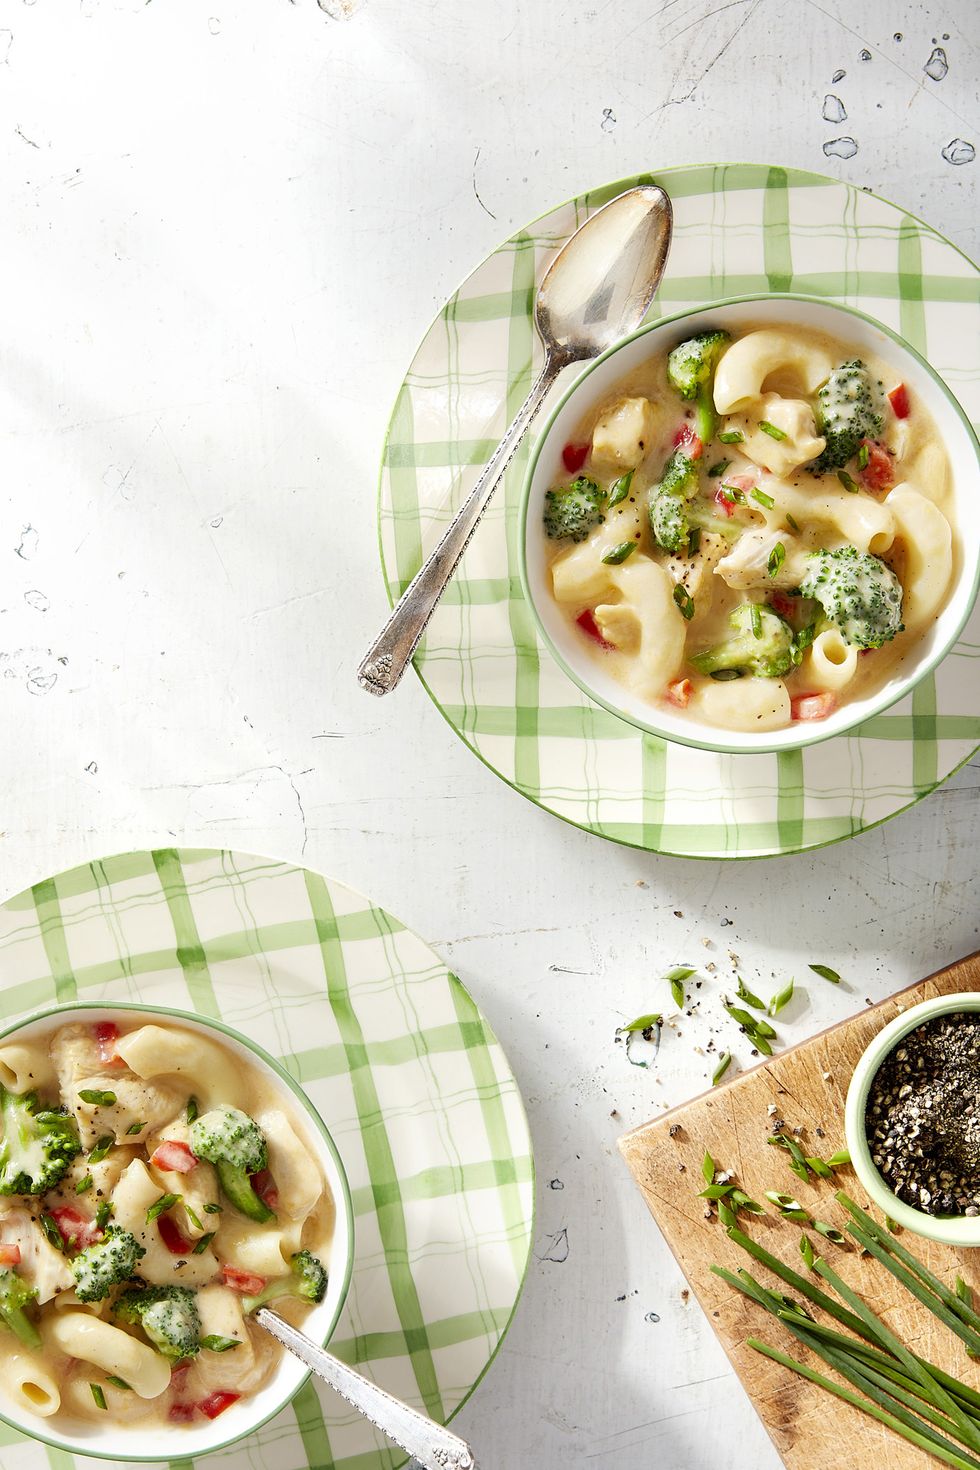 2 bowls of creamy macaroni pasta soup with broccoli, set on summery green and white plaid patterned plates